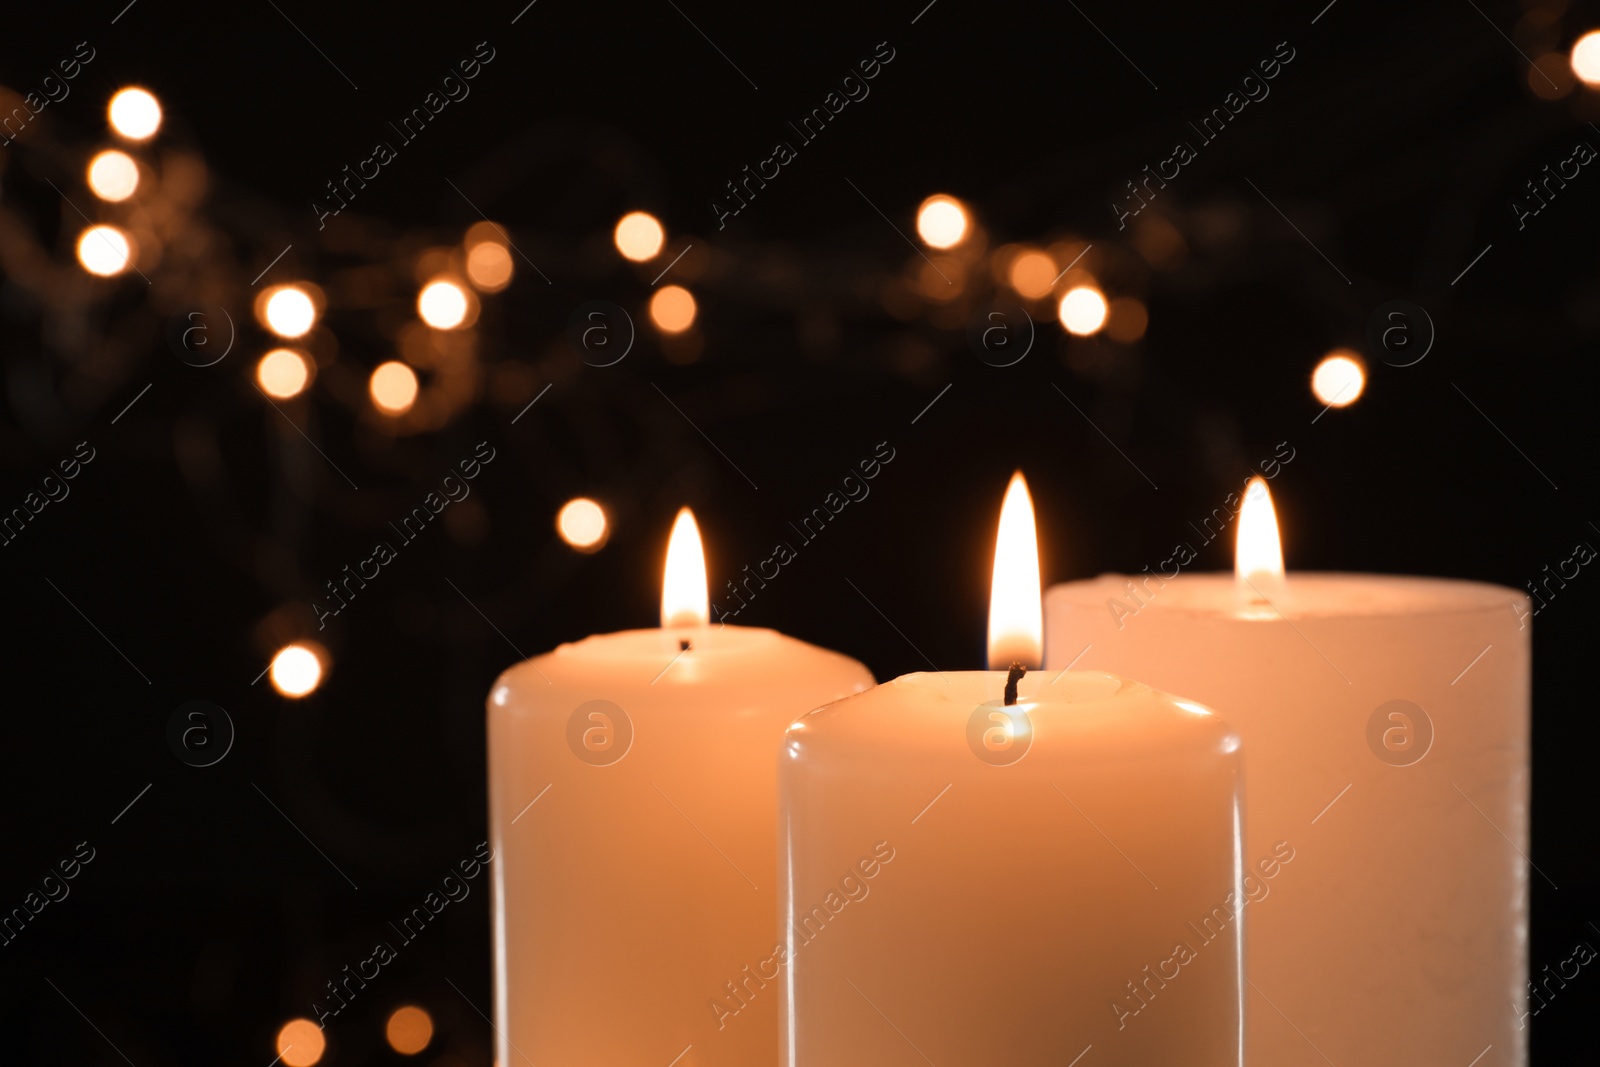 Photo of Wax candles burning against blurred lights in darkness